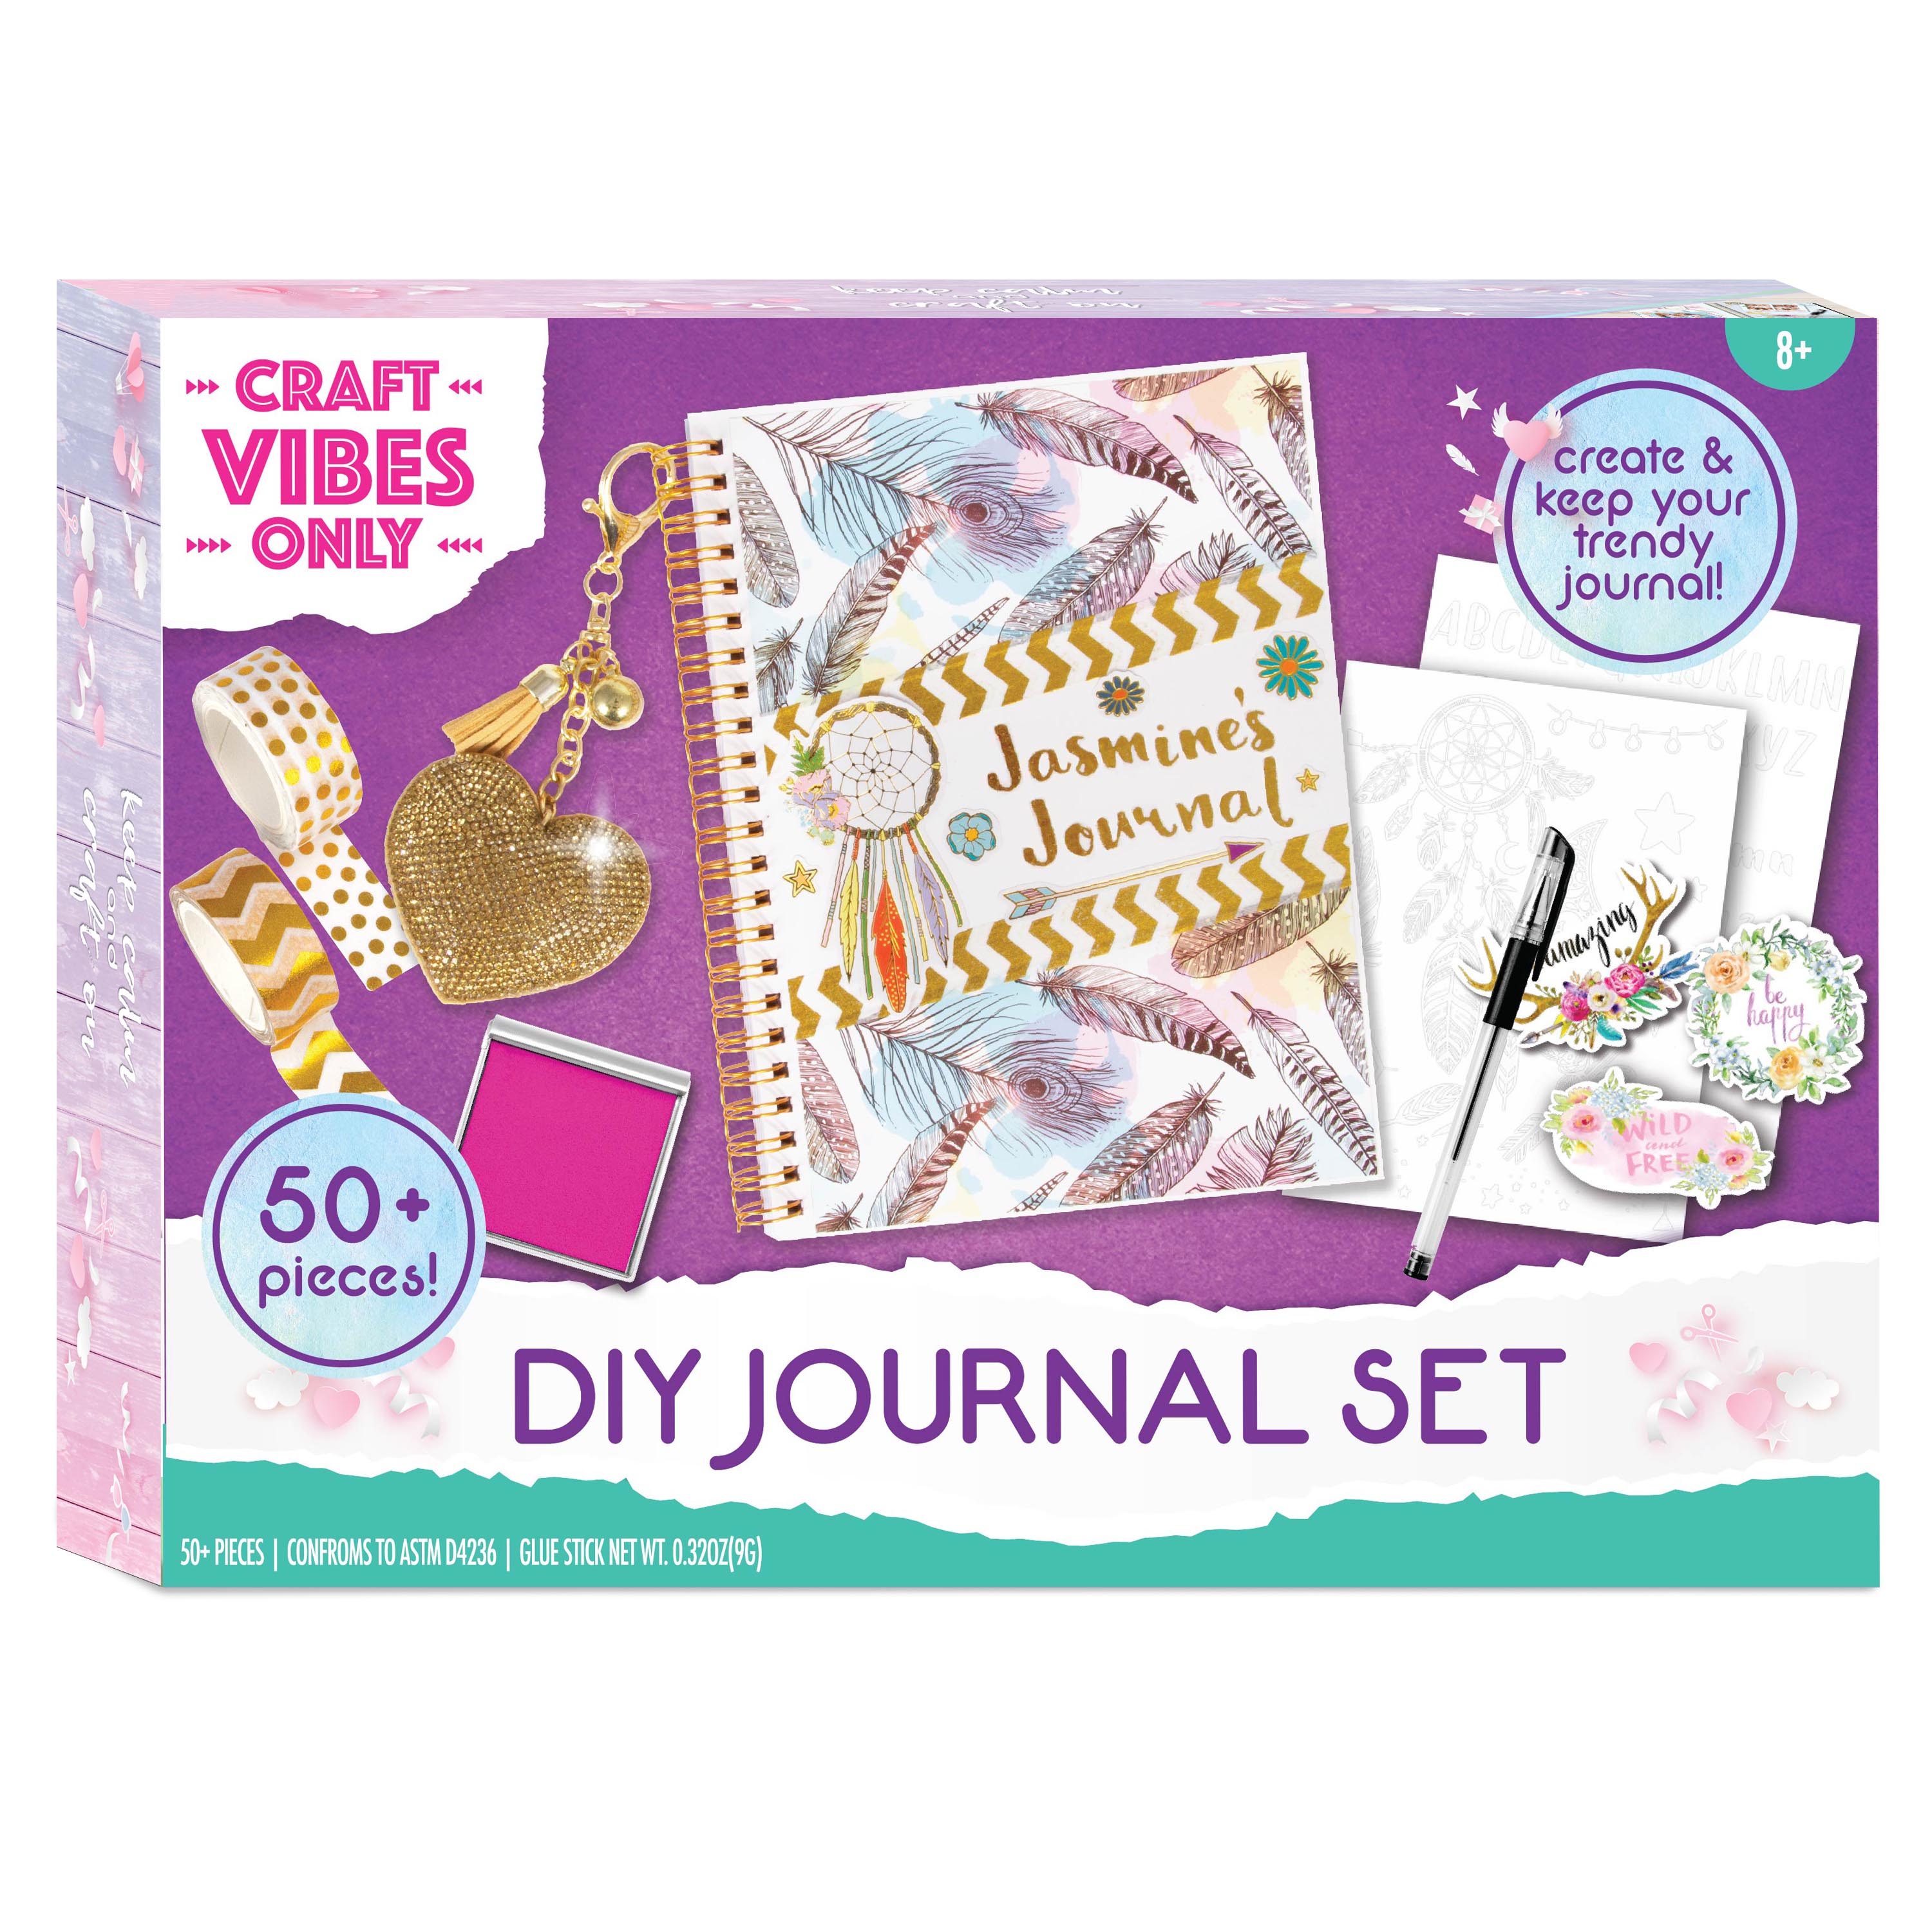 Great Choice Products Journal Kit For Girls - Art And Crafts Gift For Kids  Age 6+